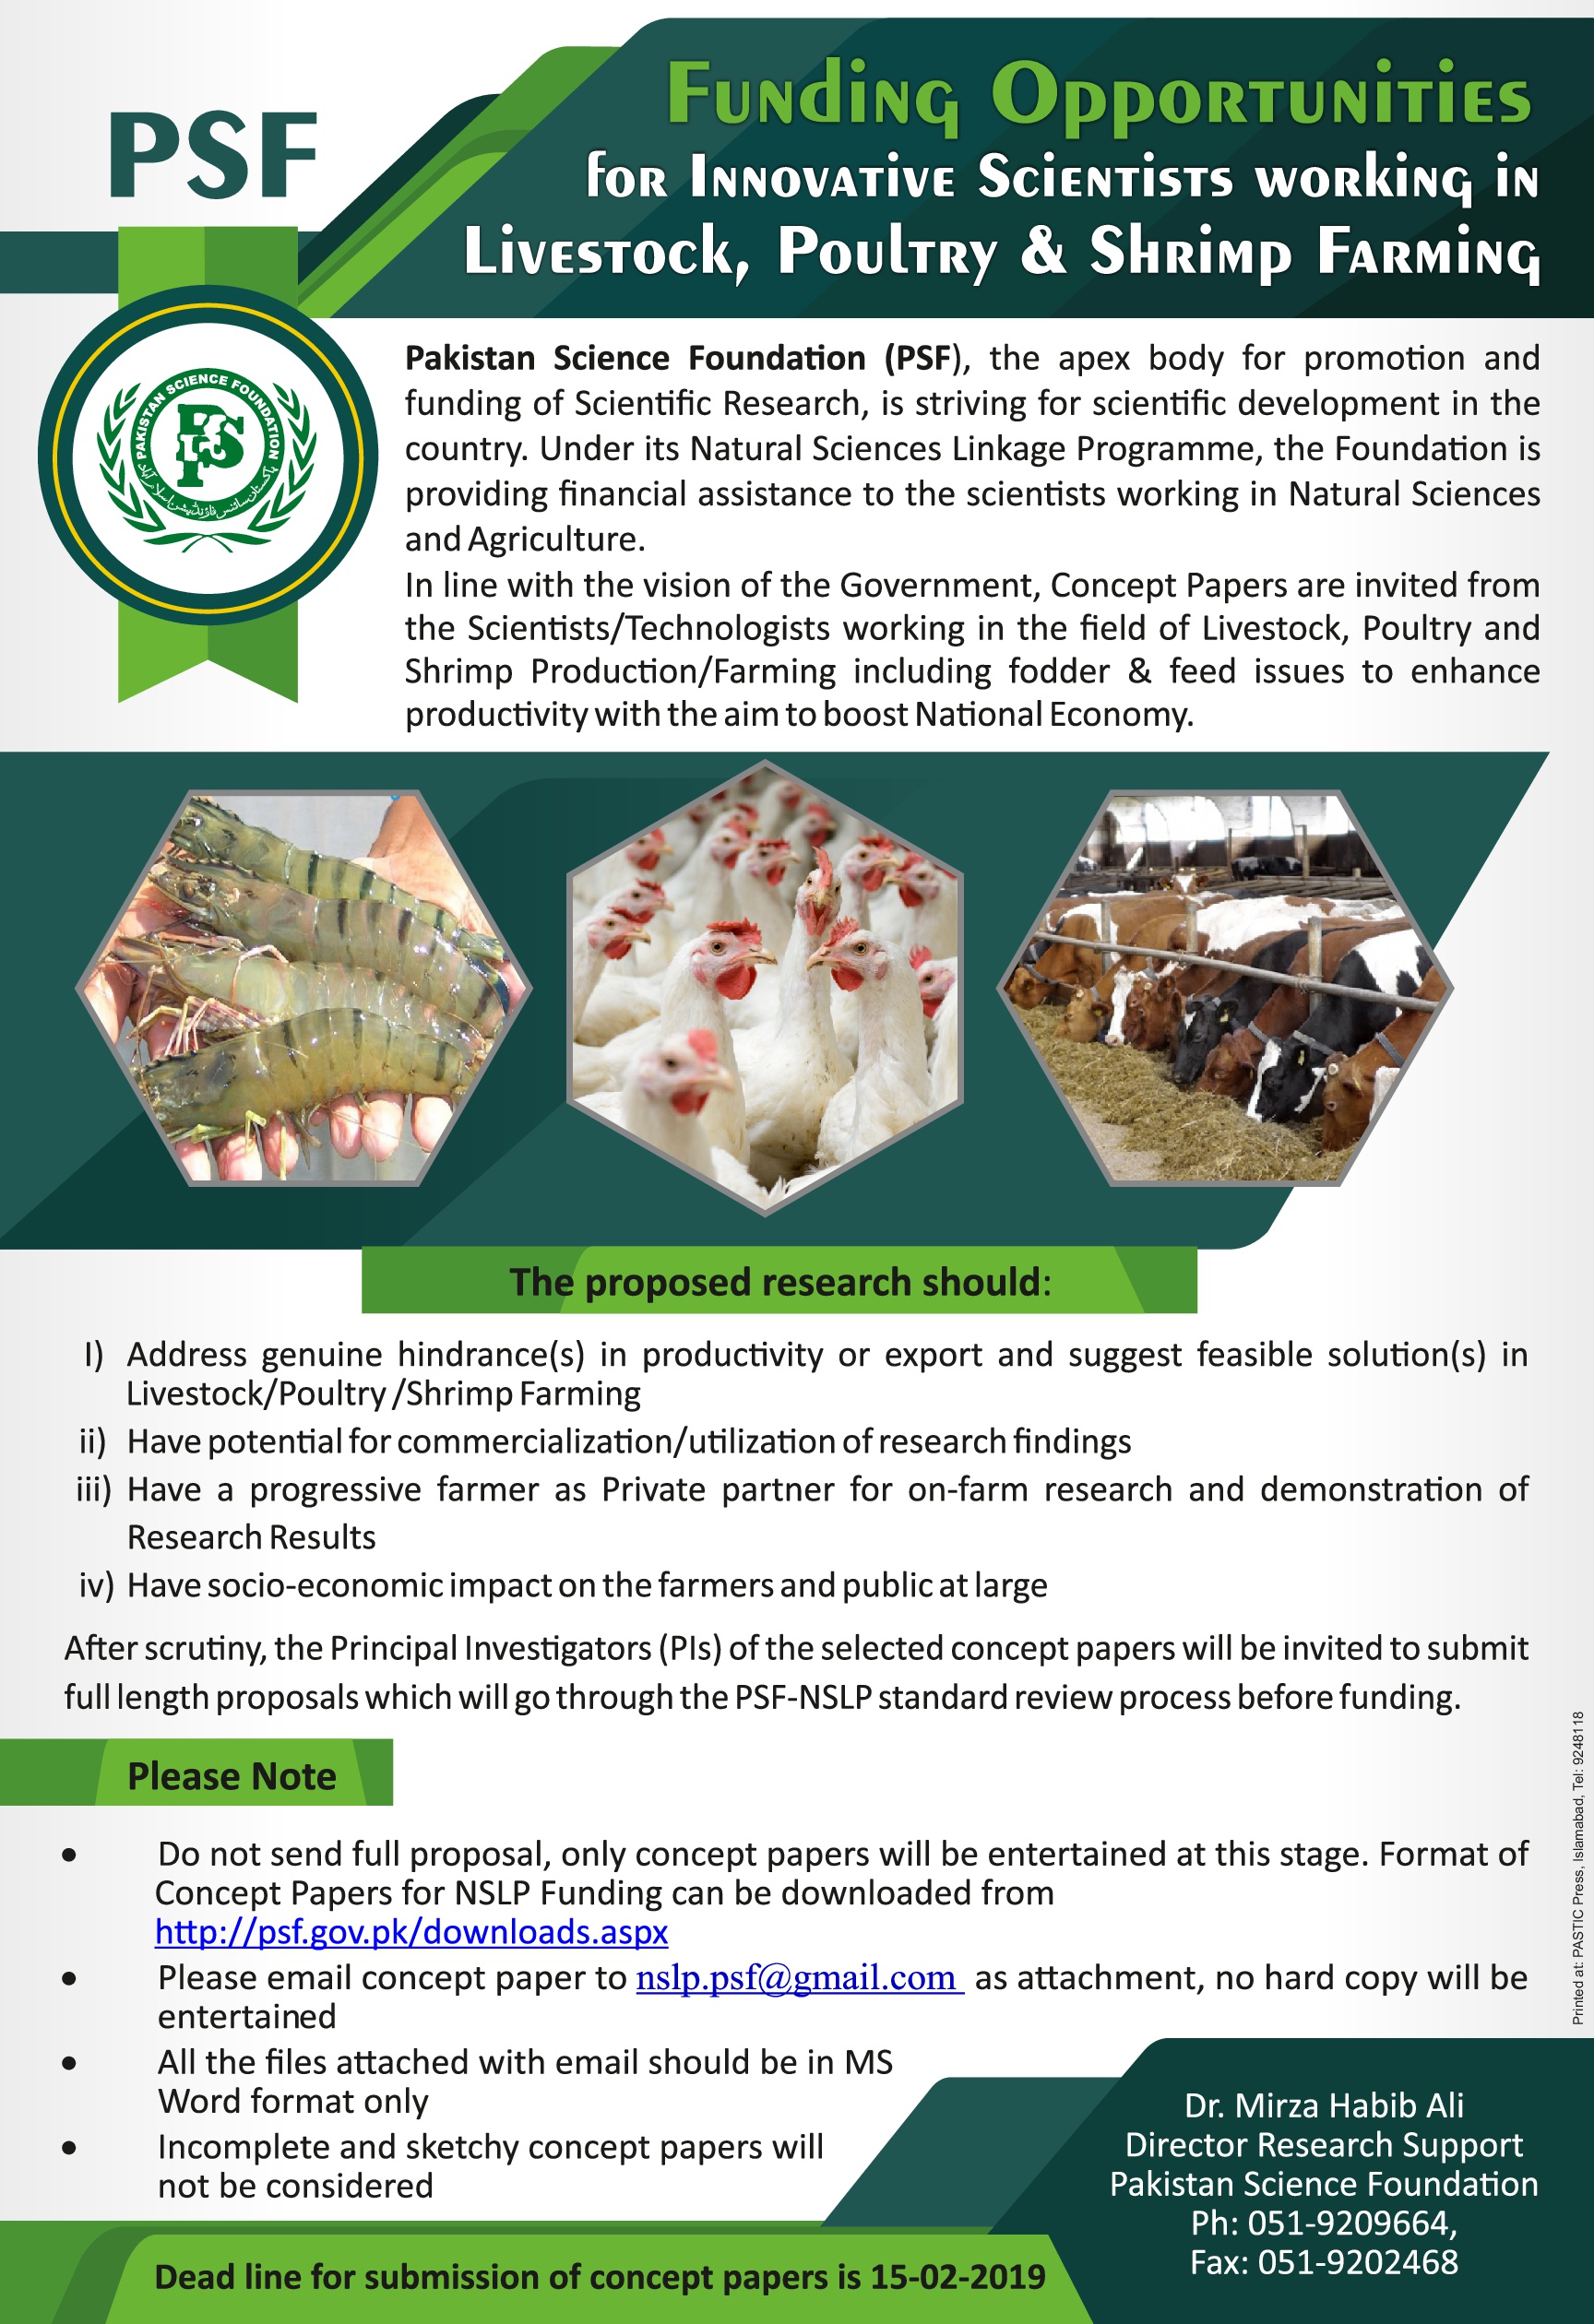 PSF Funding Opportunities for scientists interested in livestock, poultry and shrimp farming